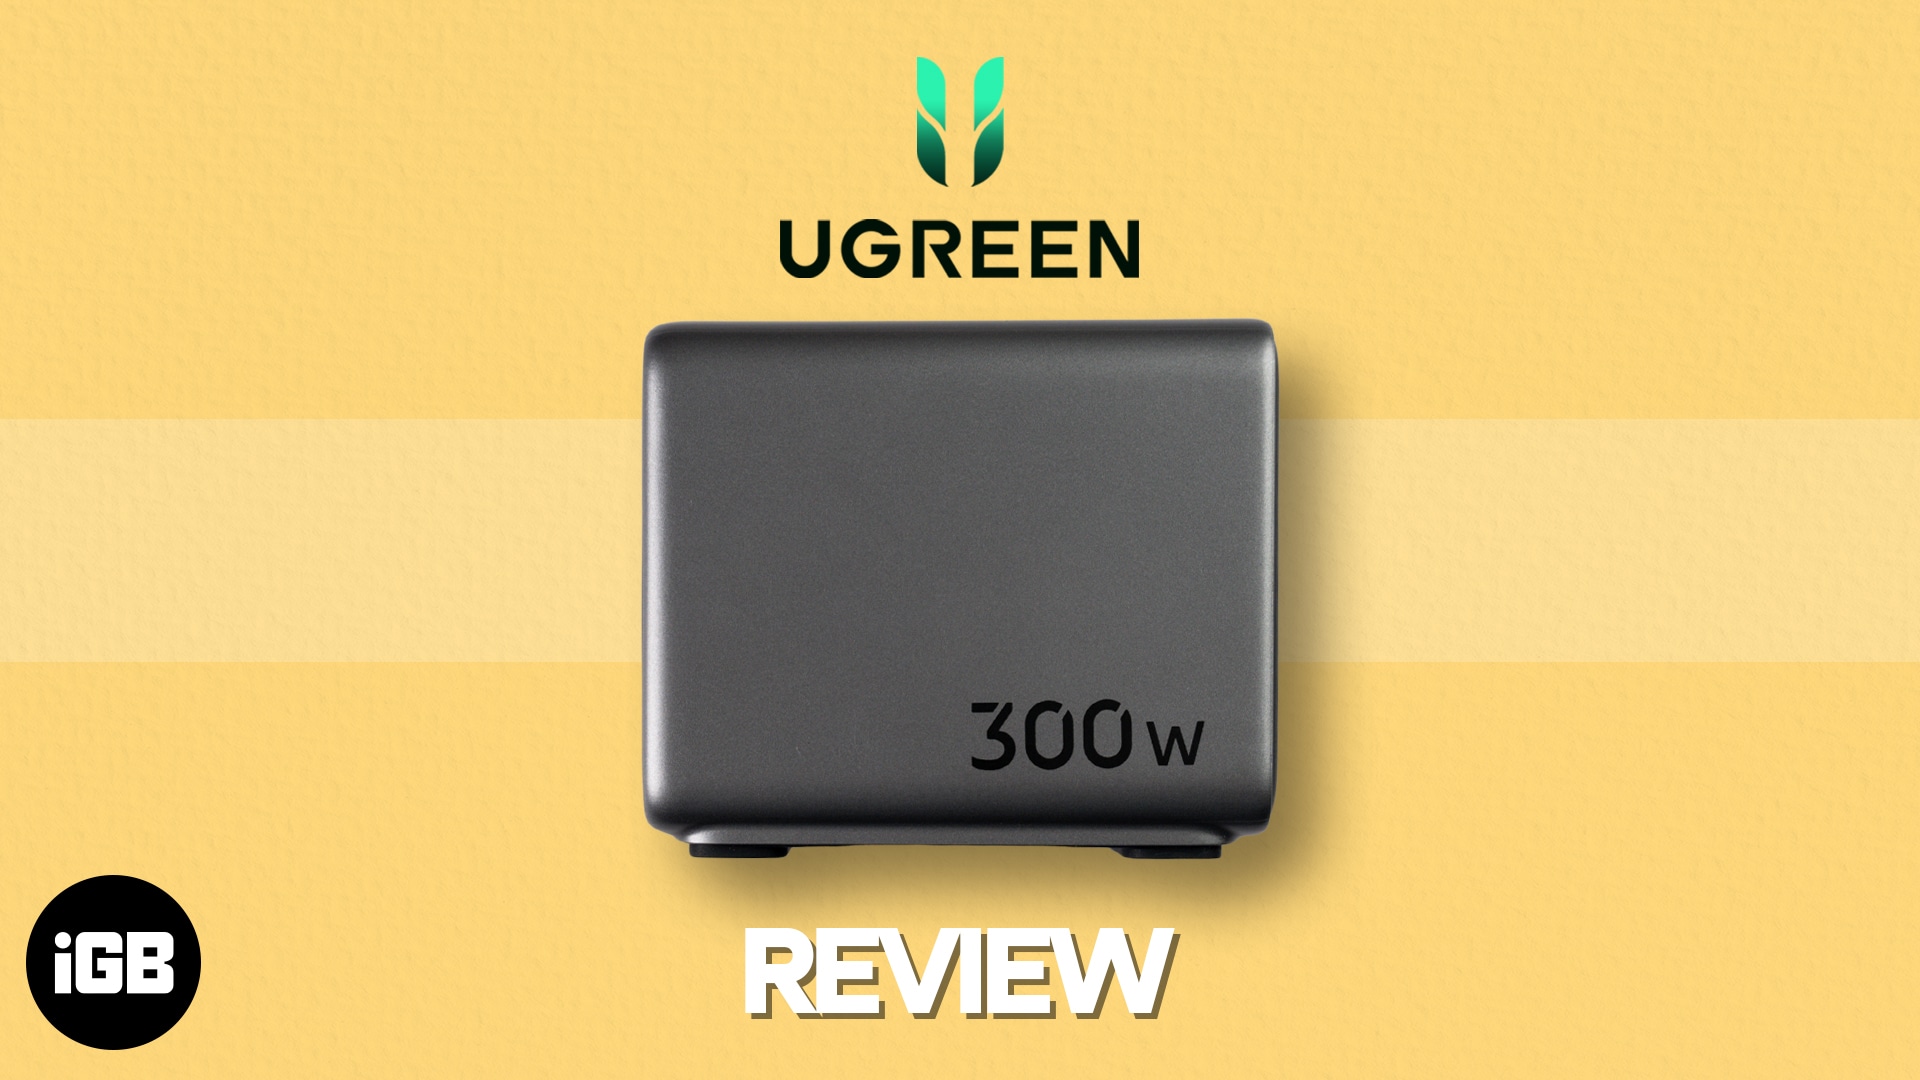 UGREEN Nexode 300W GaN Desktop Charger Review: One Charger to Rule Them All